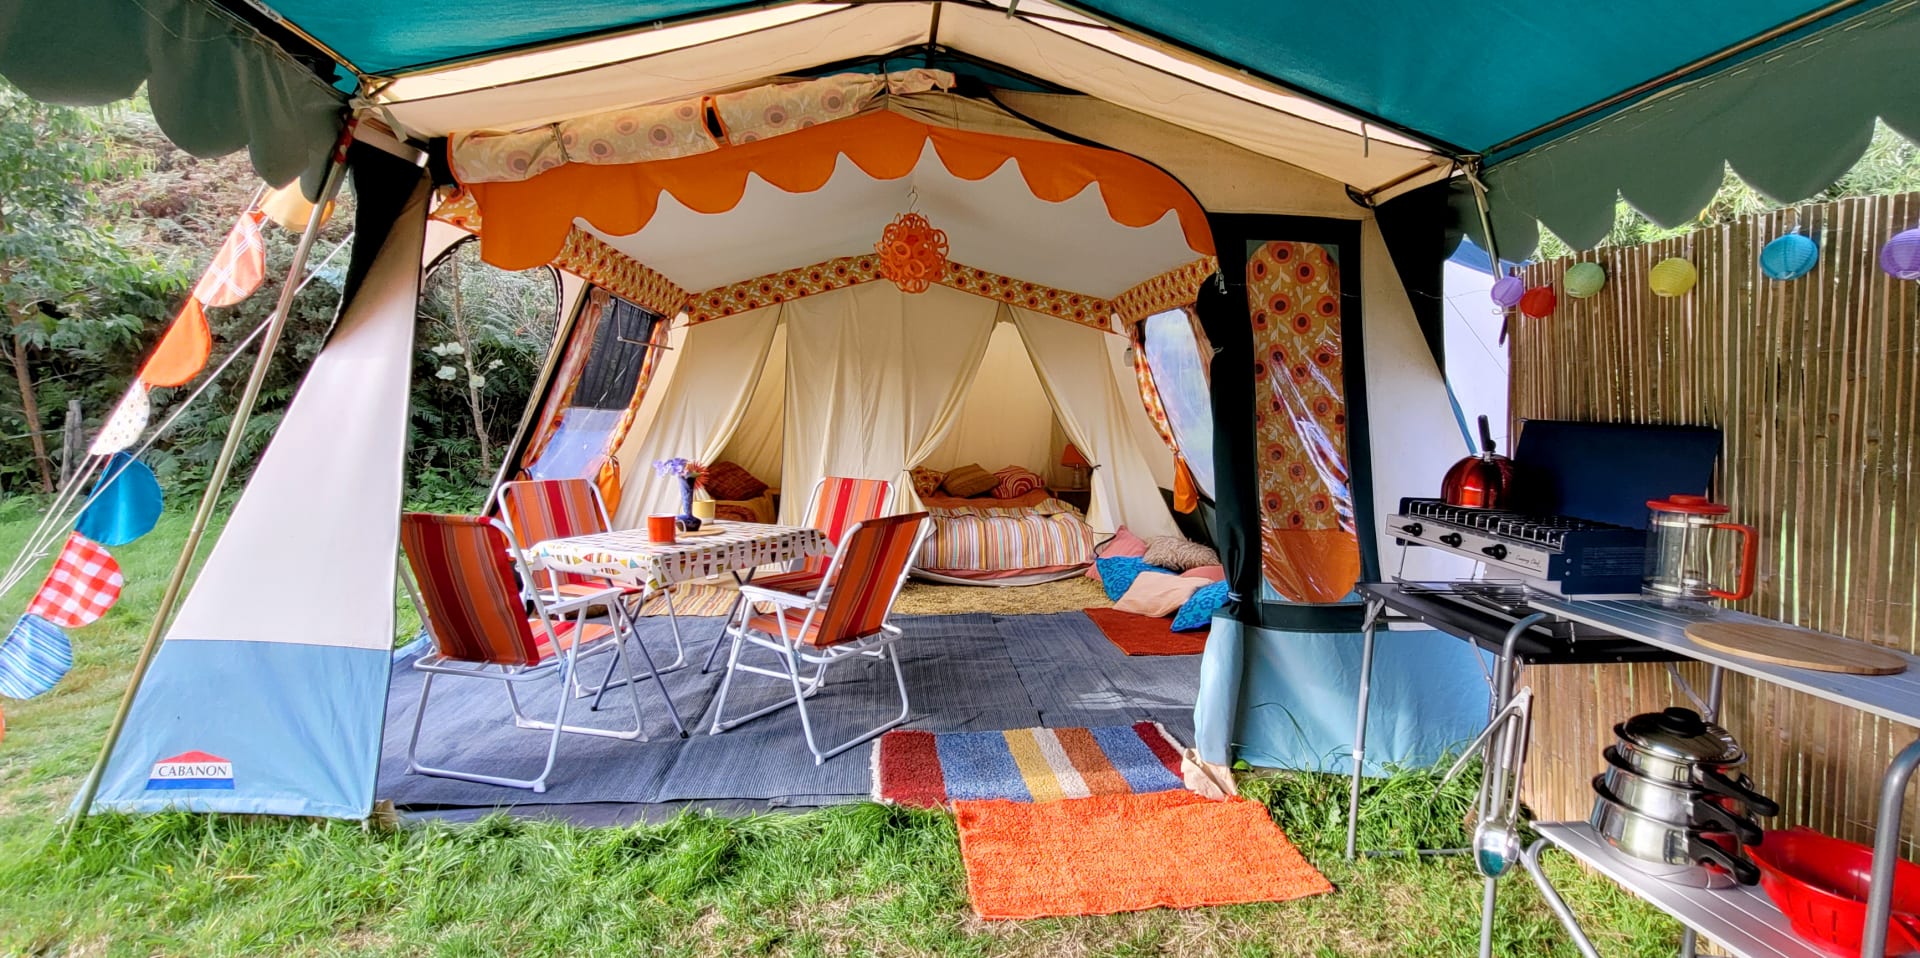 Glamping Tips and Ideas - Make Life Lovely